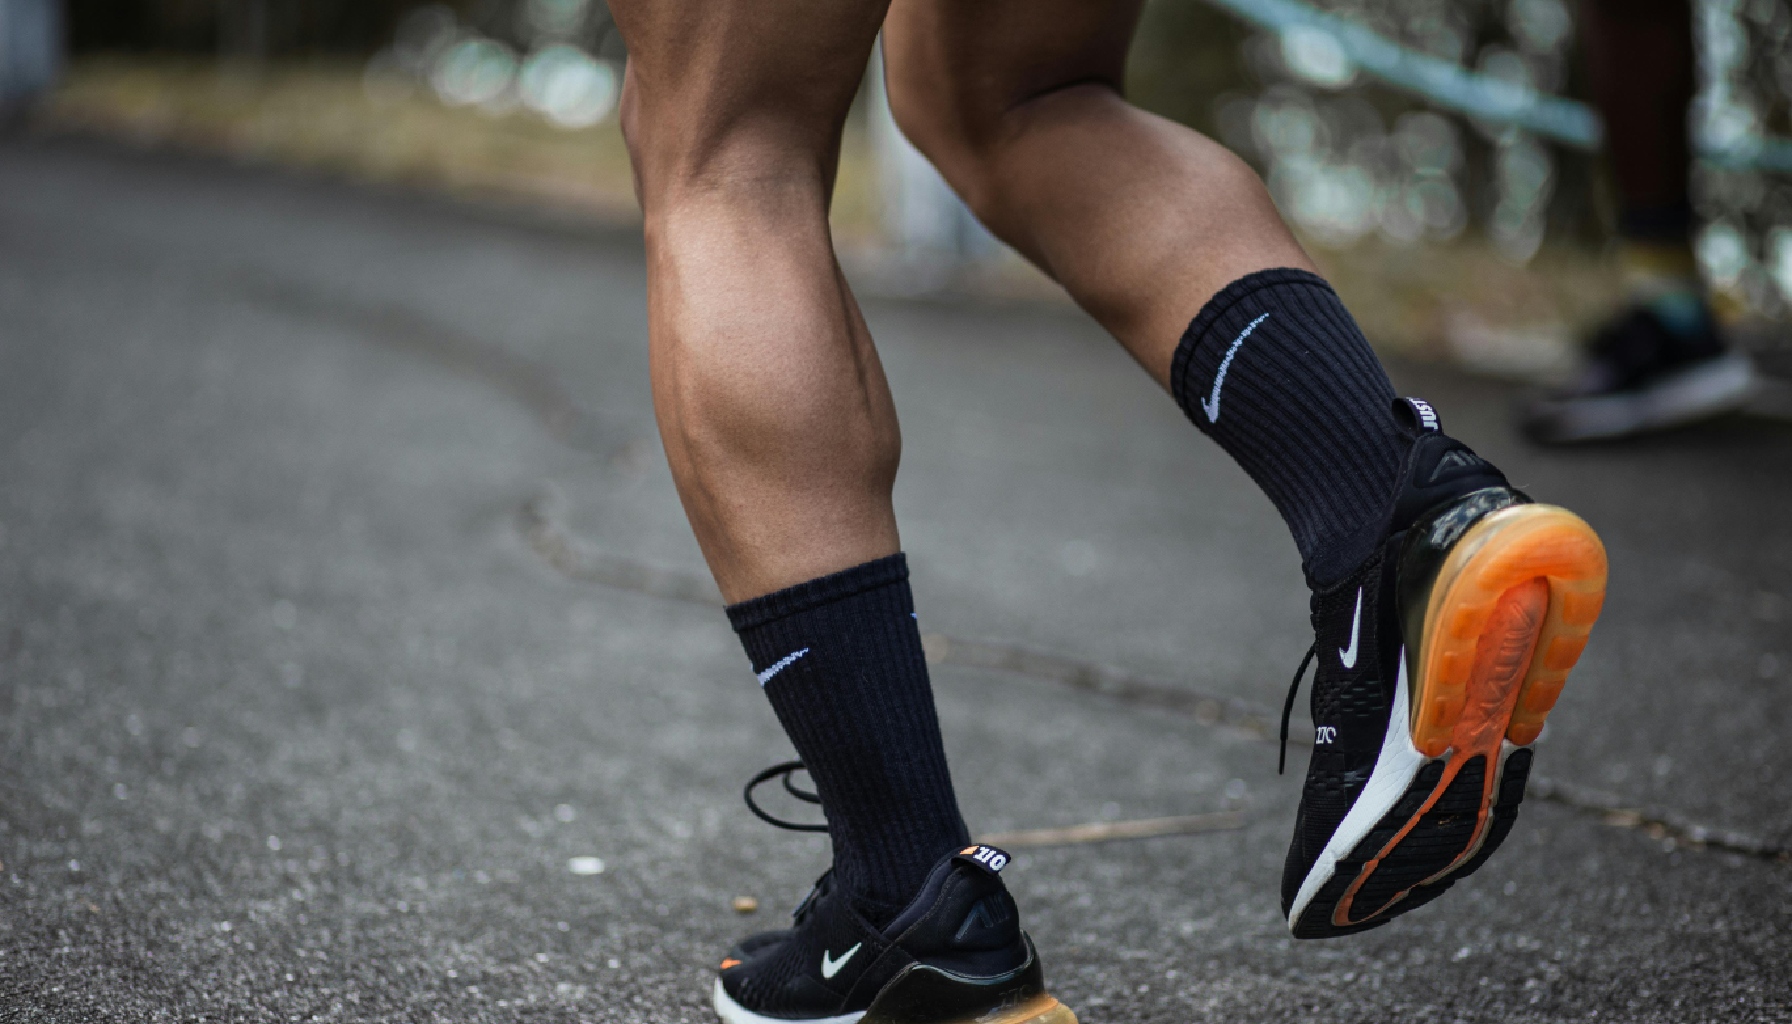 7 Underrated Calf Exercises For Runners: Boost Strength And Speed